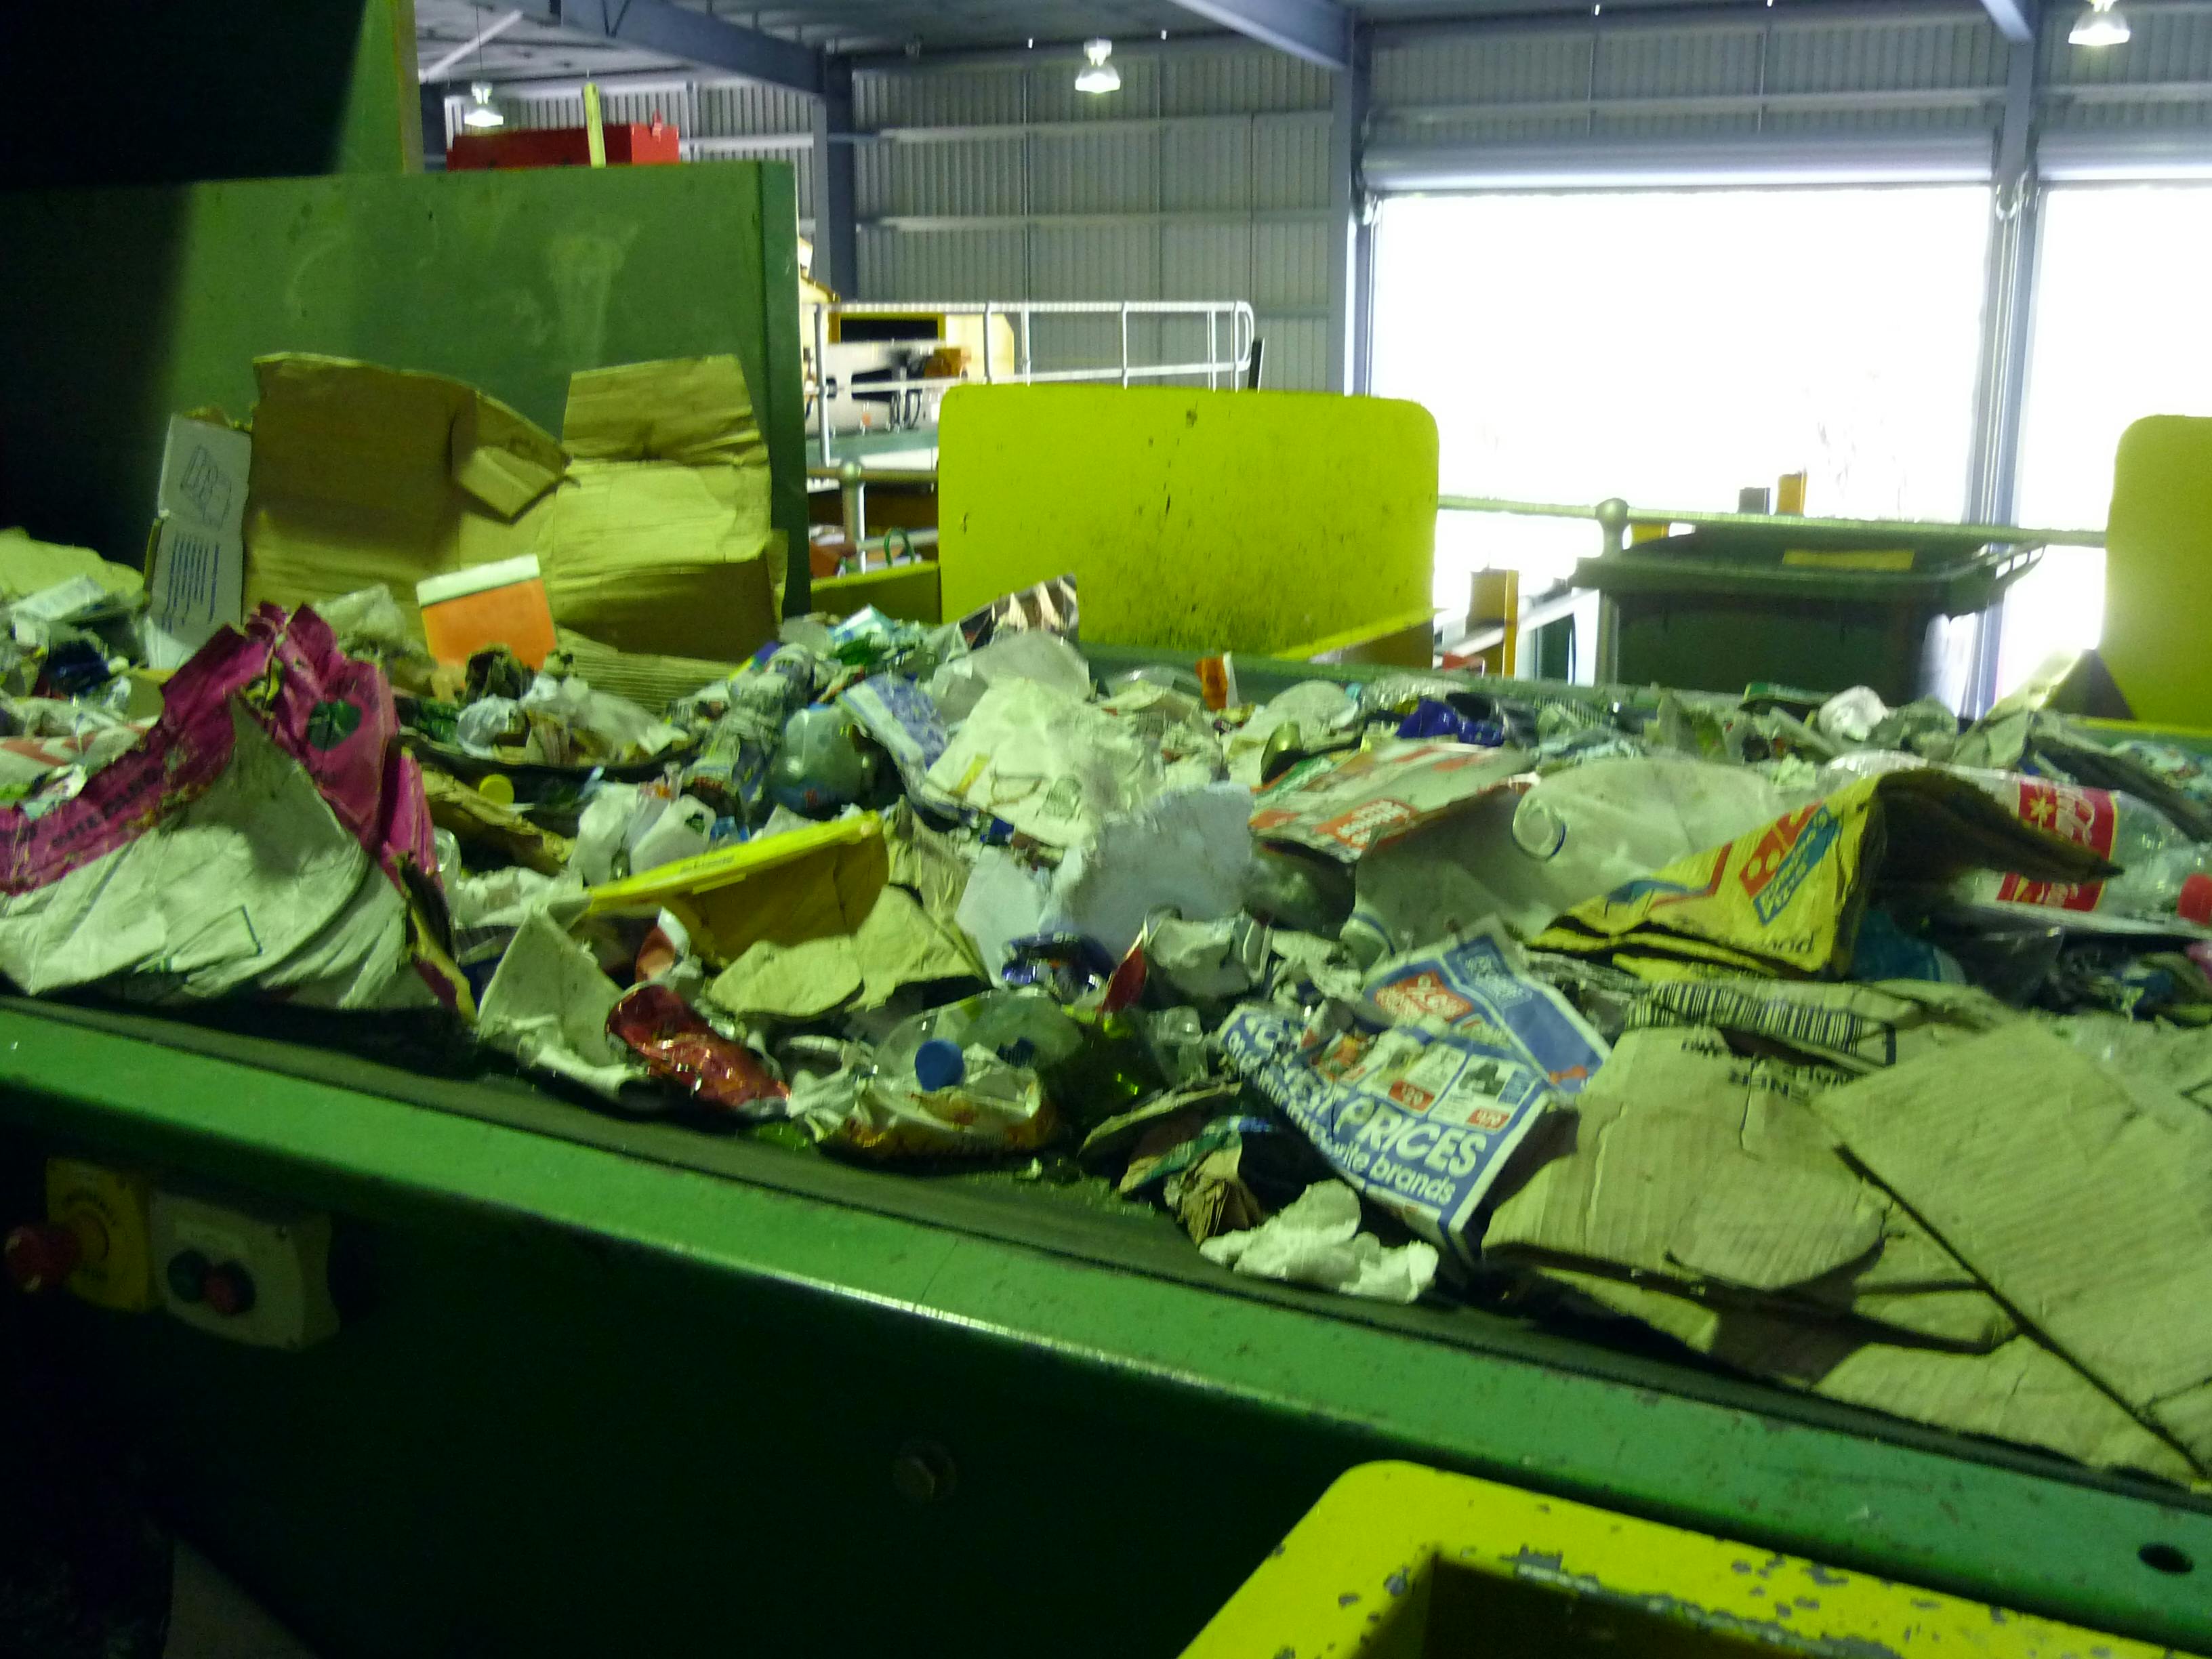 Materials Recovery Facility - Recyclables on conveyor belt